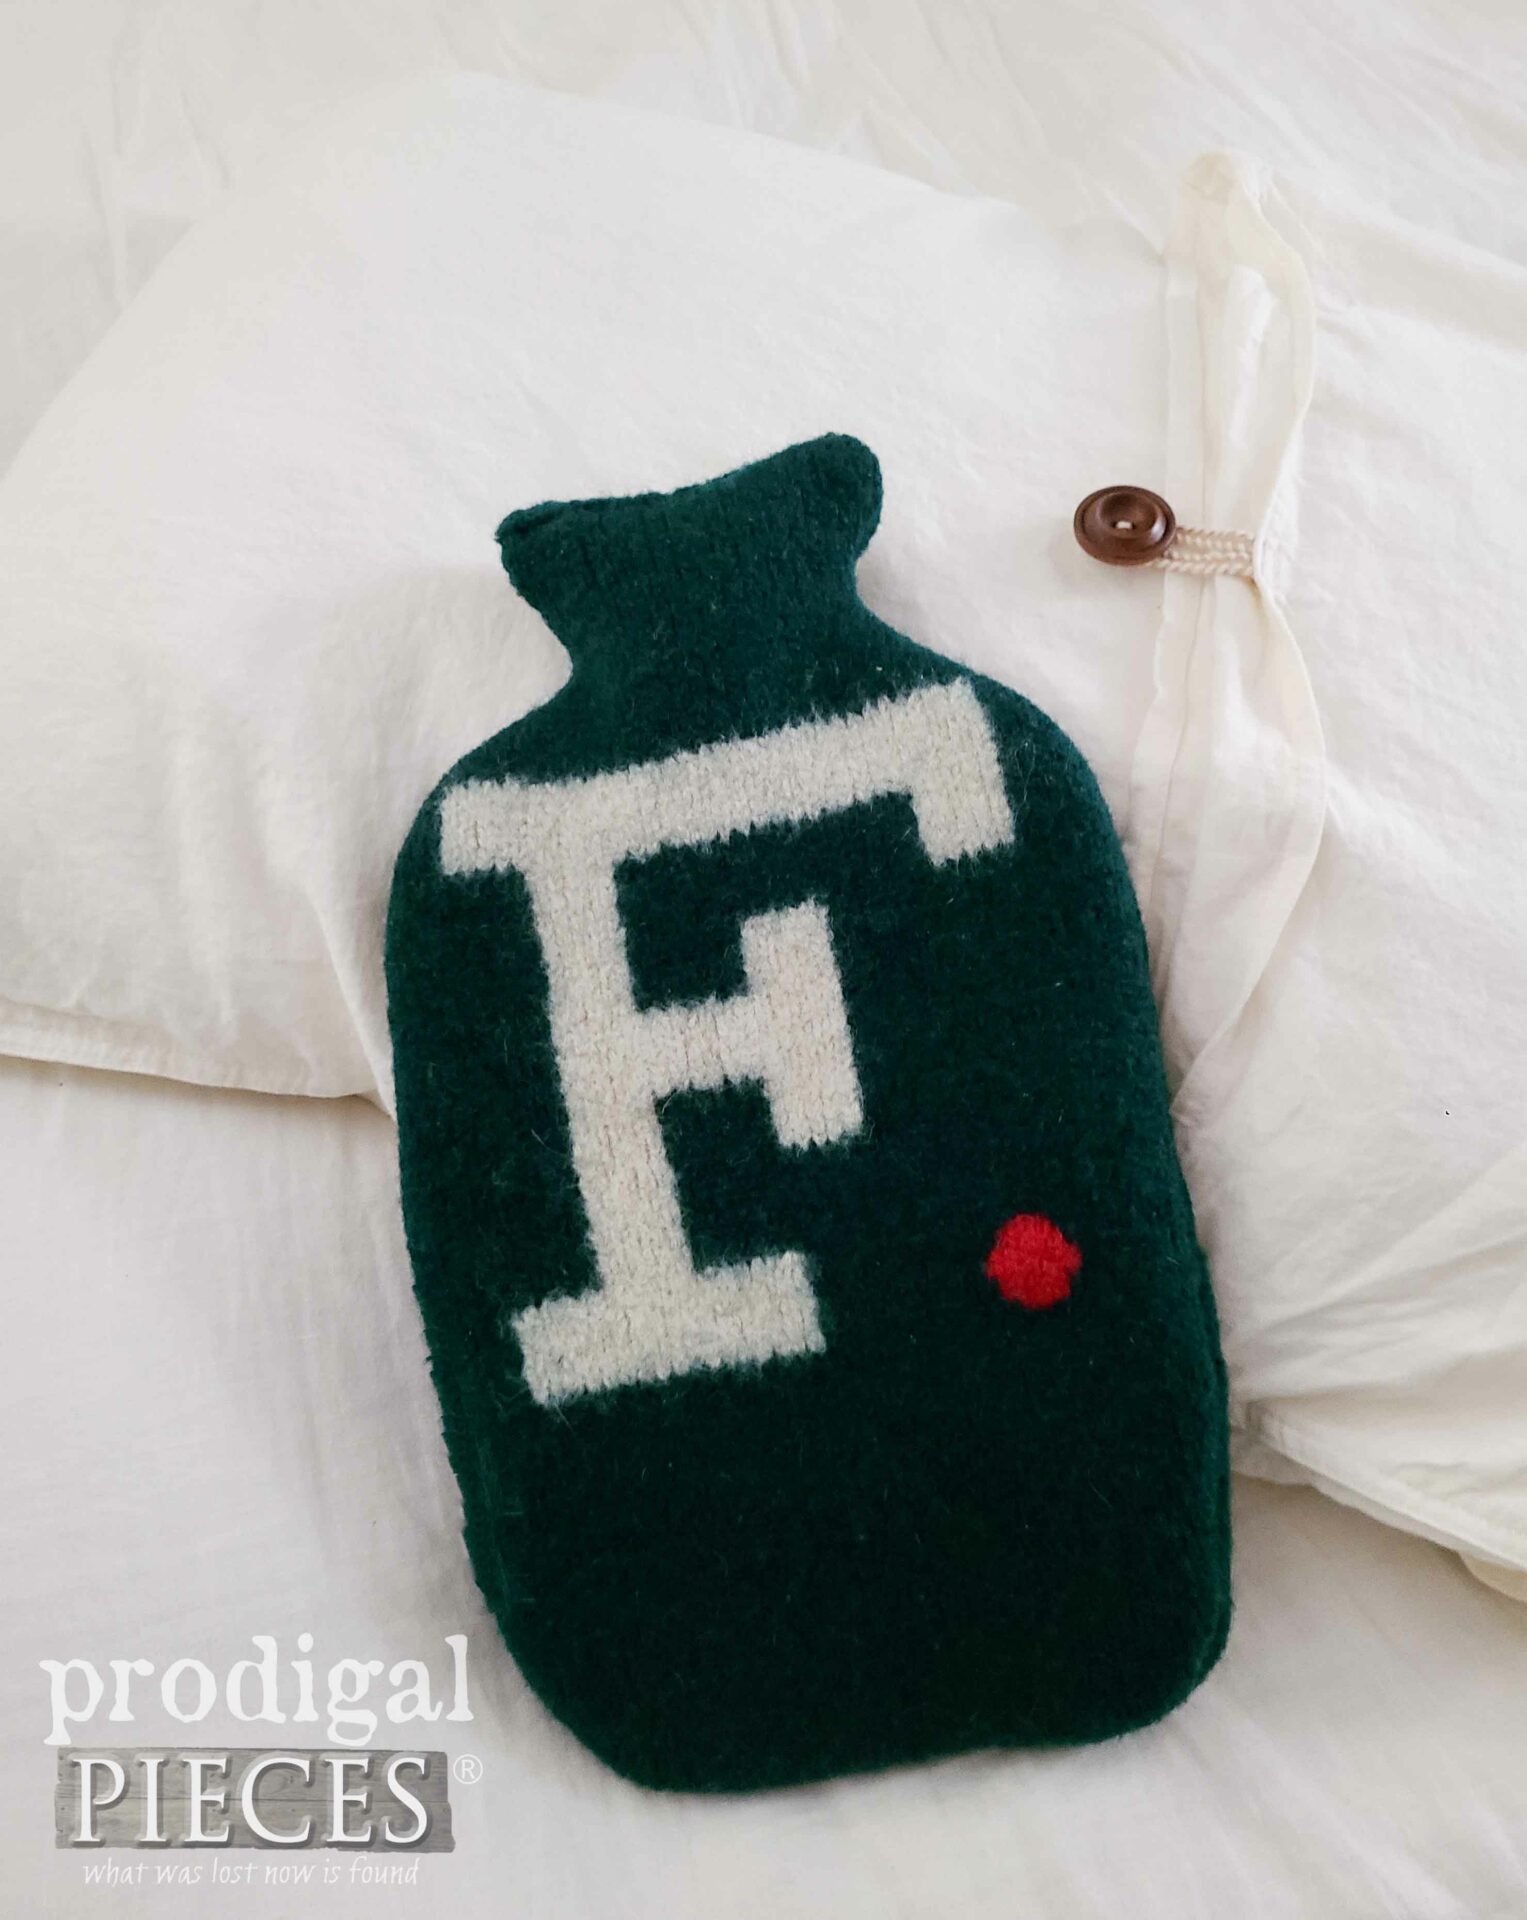 Handmade DIY Hot Water Bottle Cover with F. by Larissa of Prodigal Pieces | prodigalpieces.com #prodigalpieces #refashion #selfcare #diy